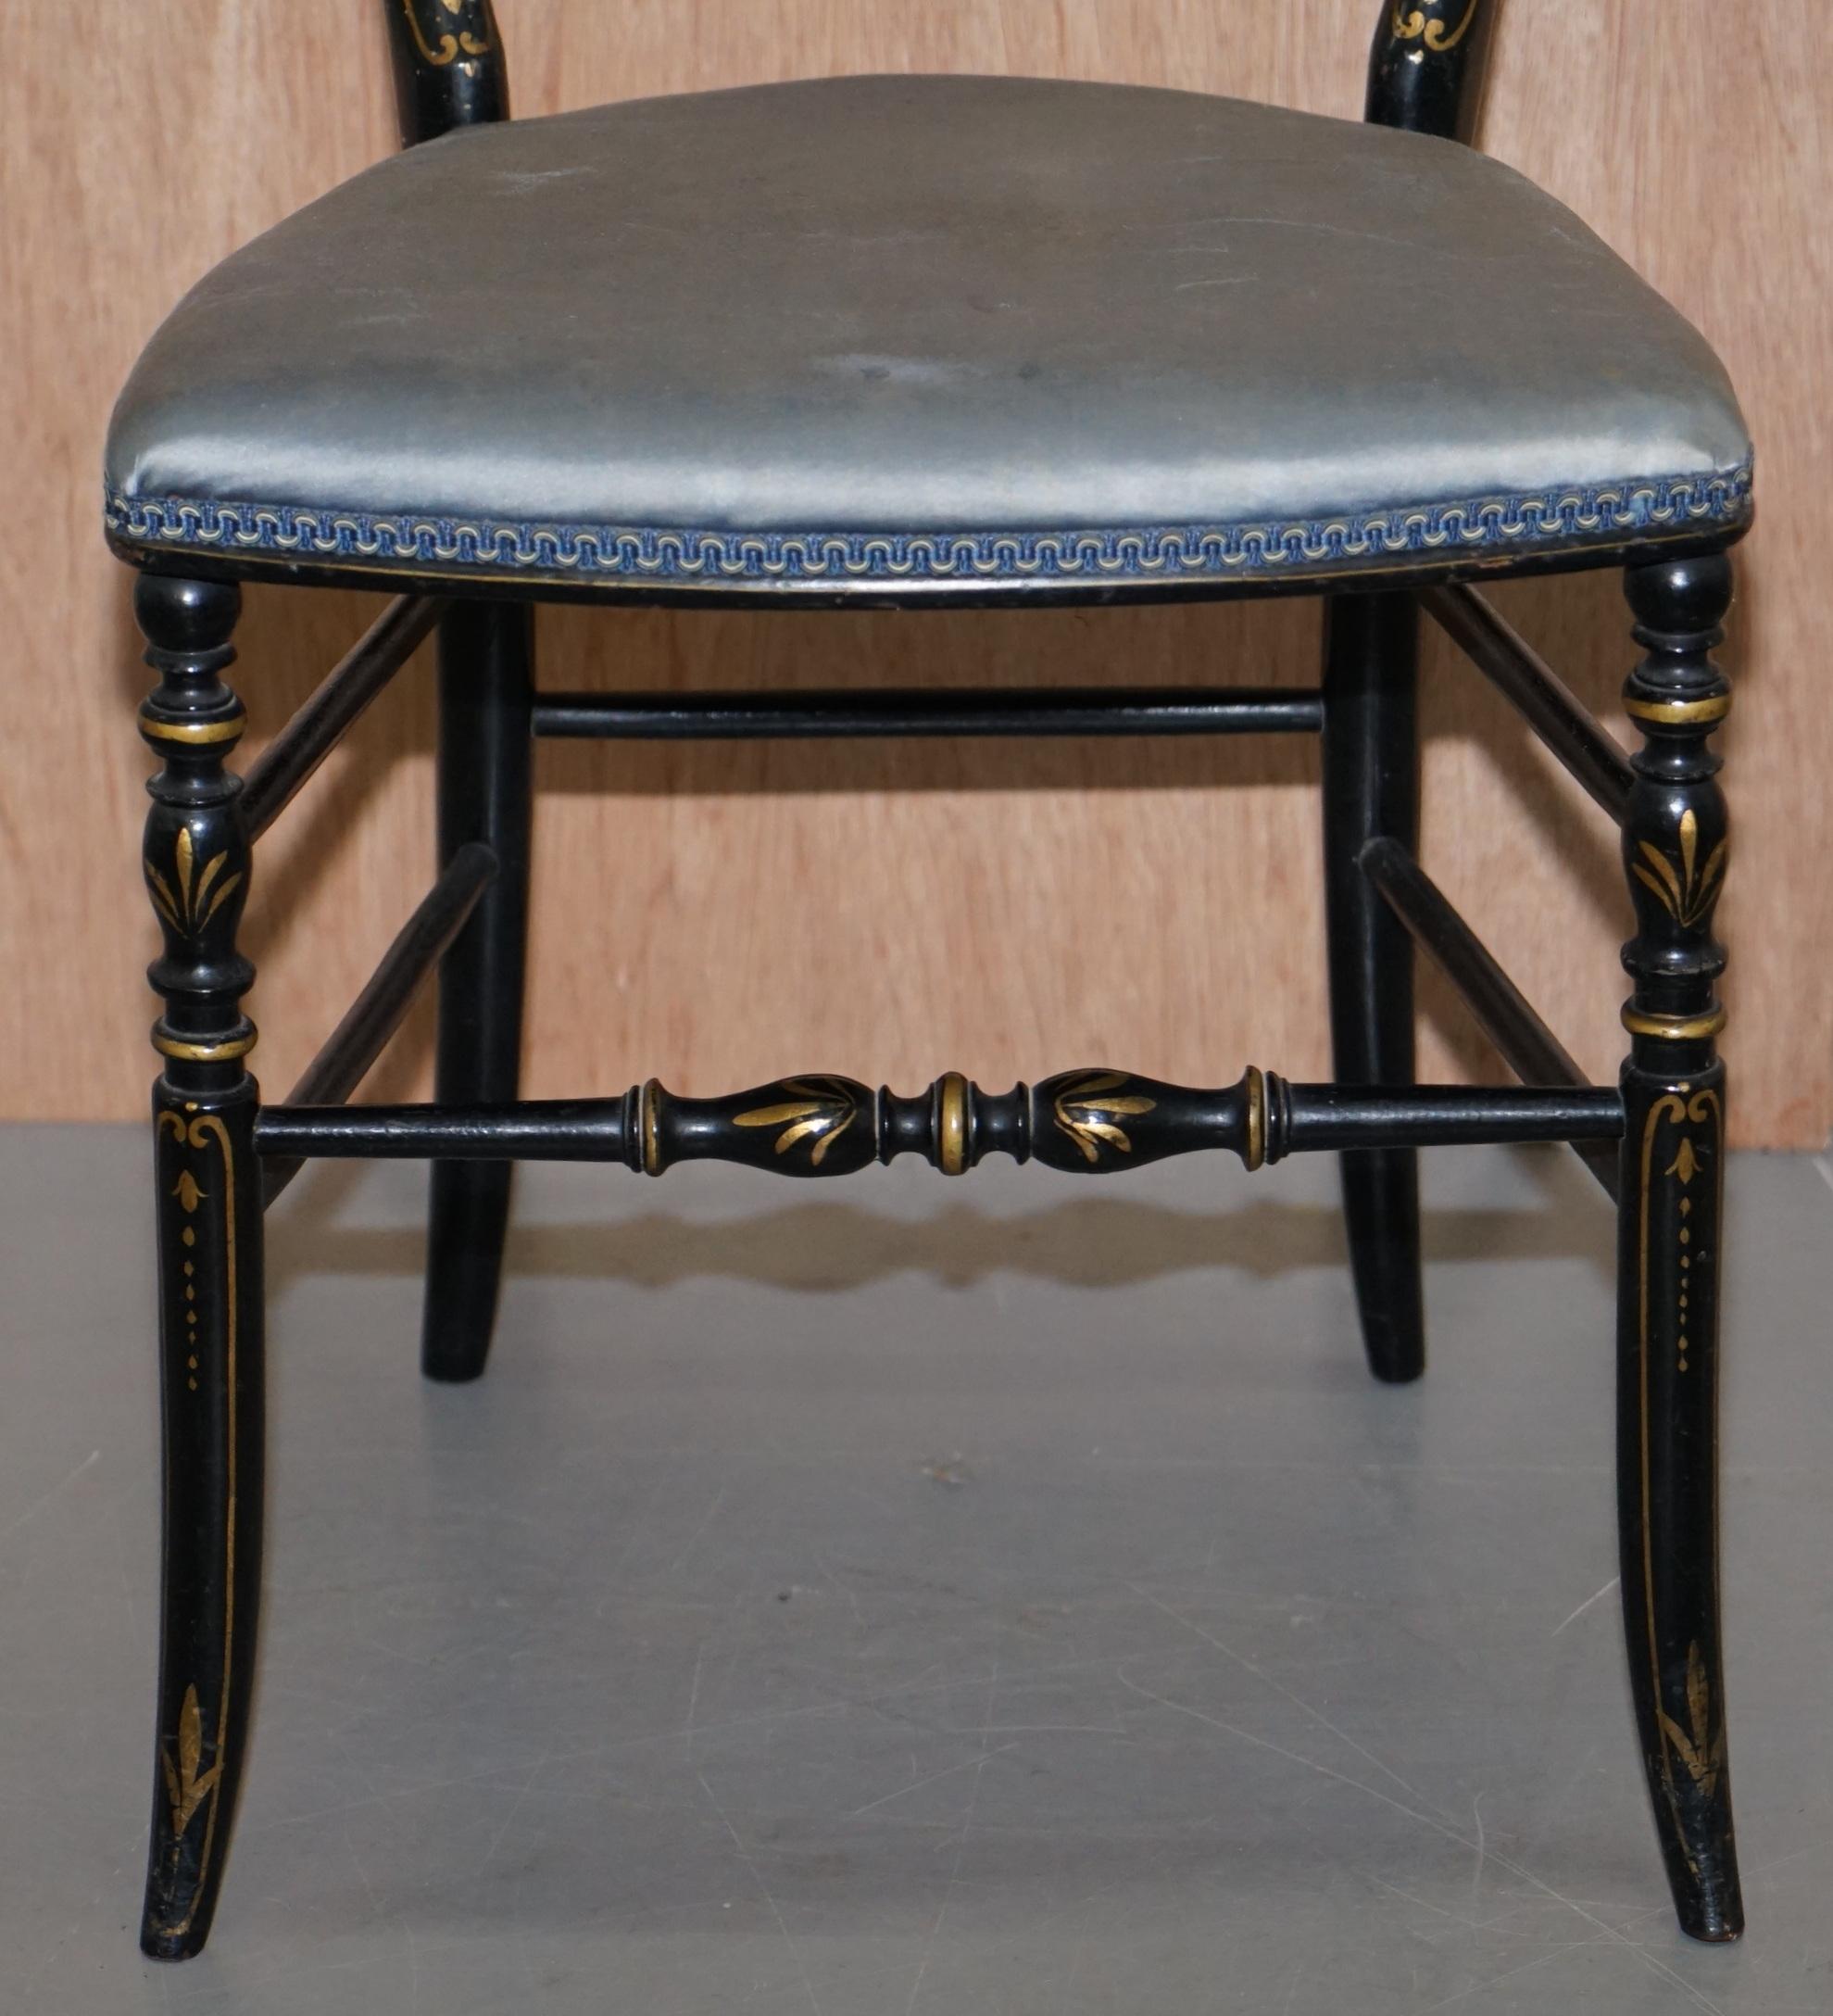 Rare Pair of Regency Floral Hand Painted Ornate Chinoiserie Ebonized Chairs 13